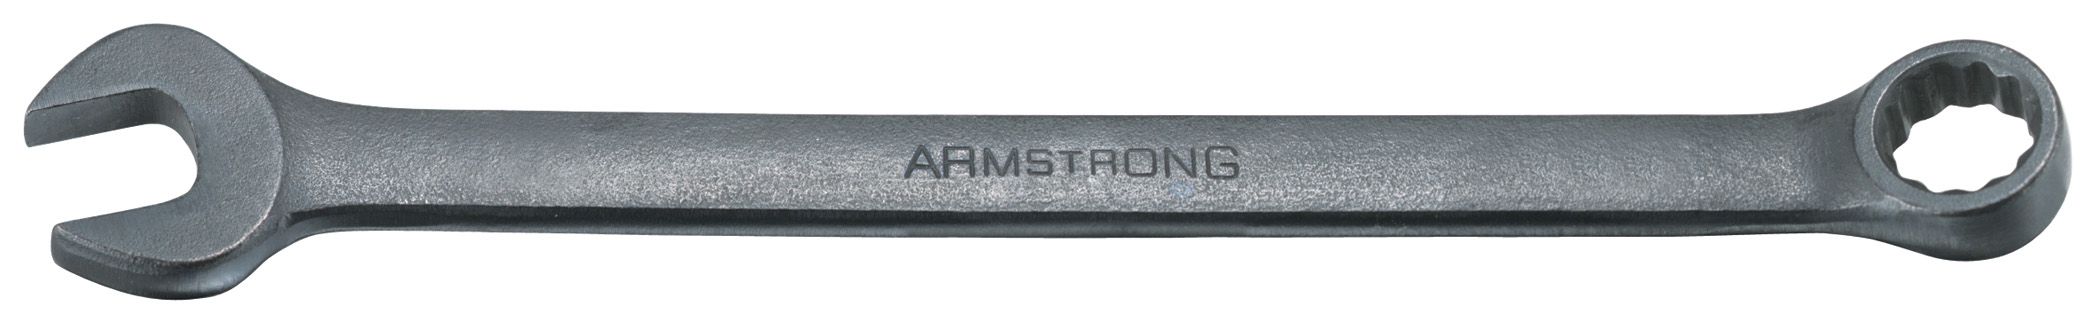 Armstrong 2-1/4 in. 12 pt. Black Oxide Long Combination Wrench